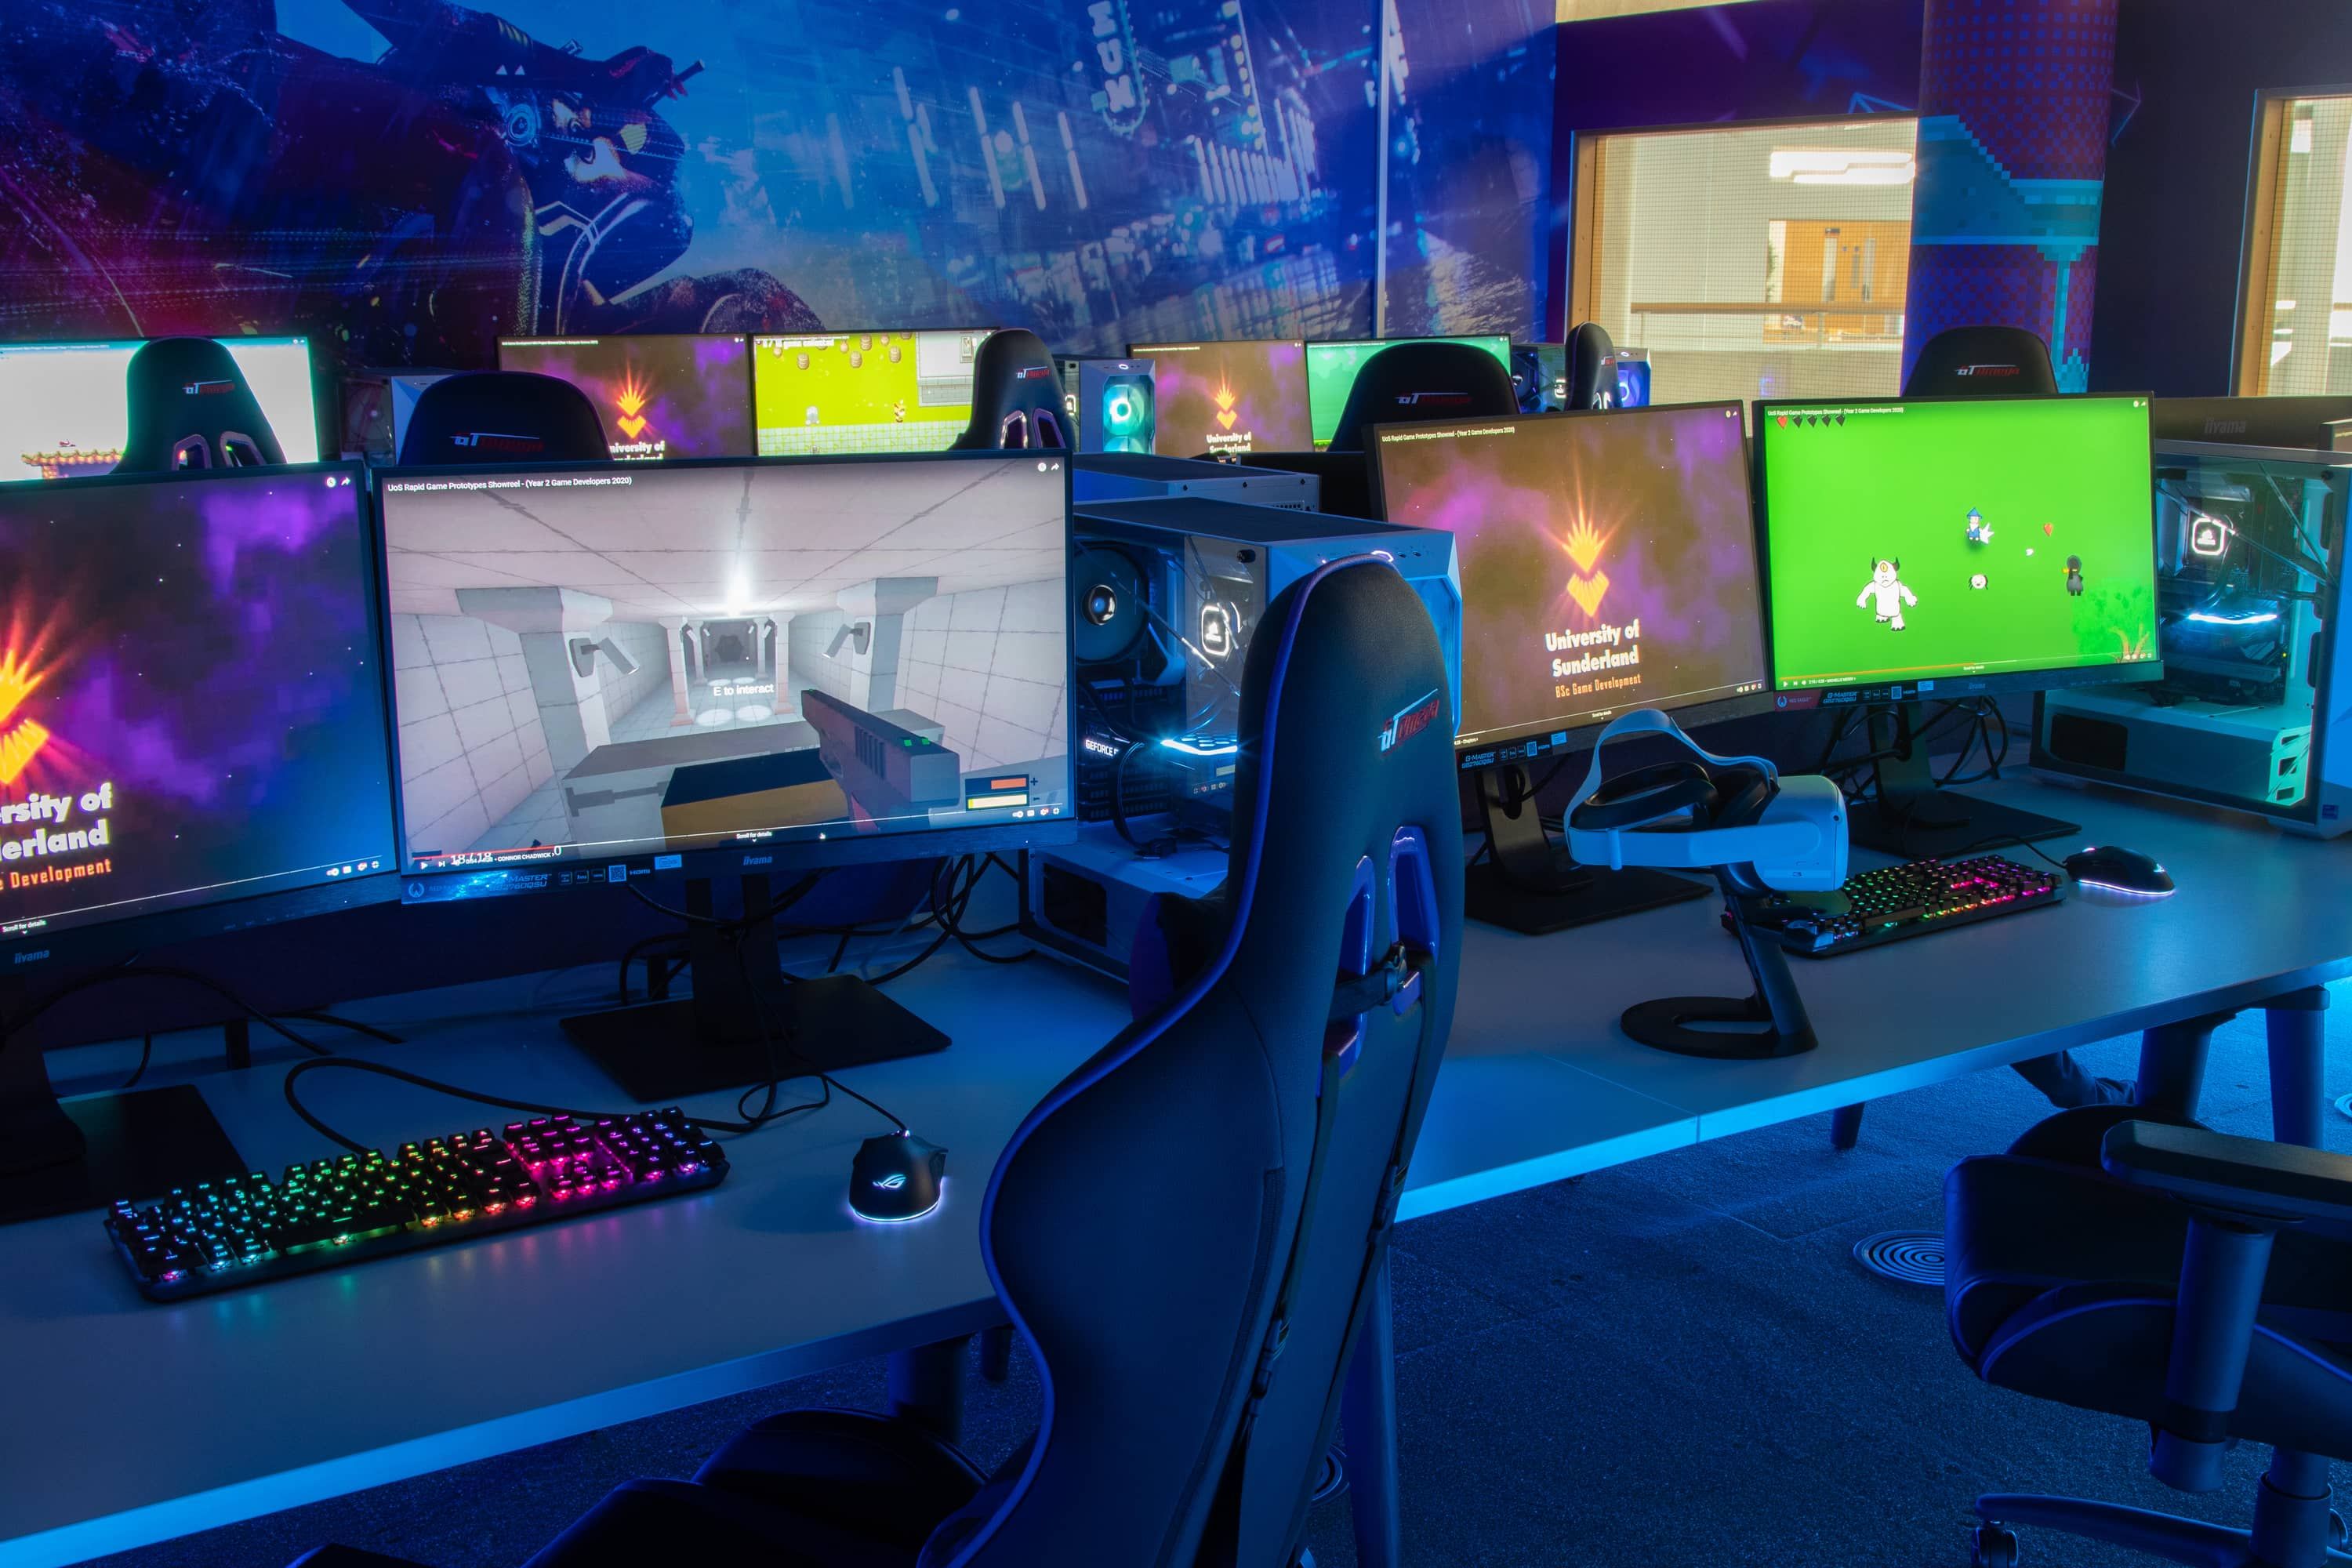 The Game Development Lab, with GT Omega PRO Series gaming chairs, dual-screen setup with 27-inch widescreen monitors, mechanical keyboards and RGB mice